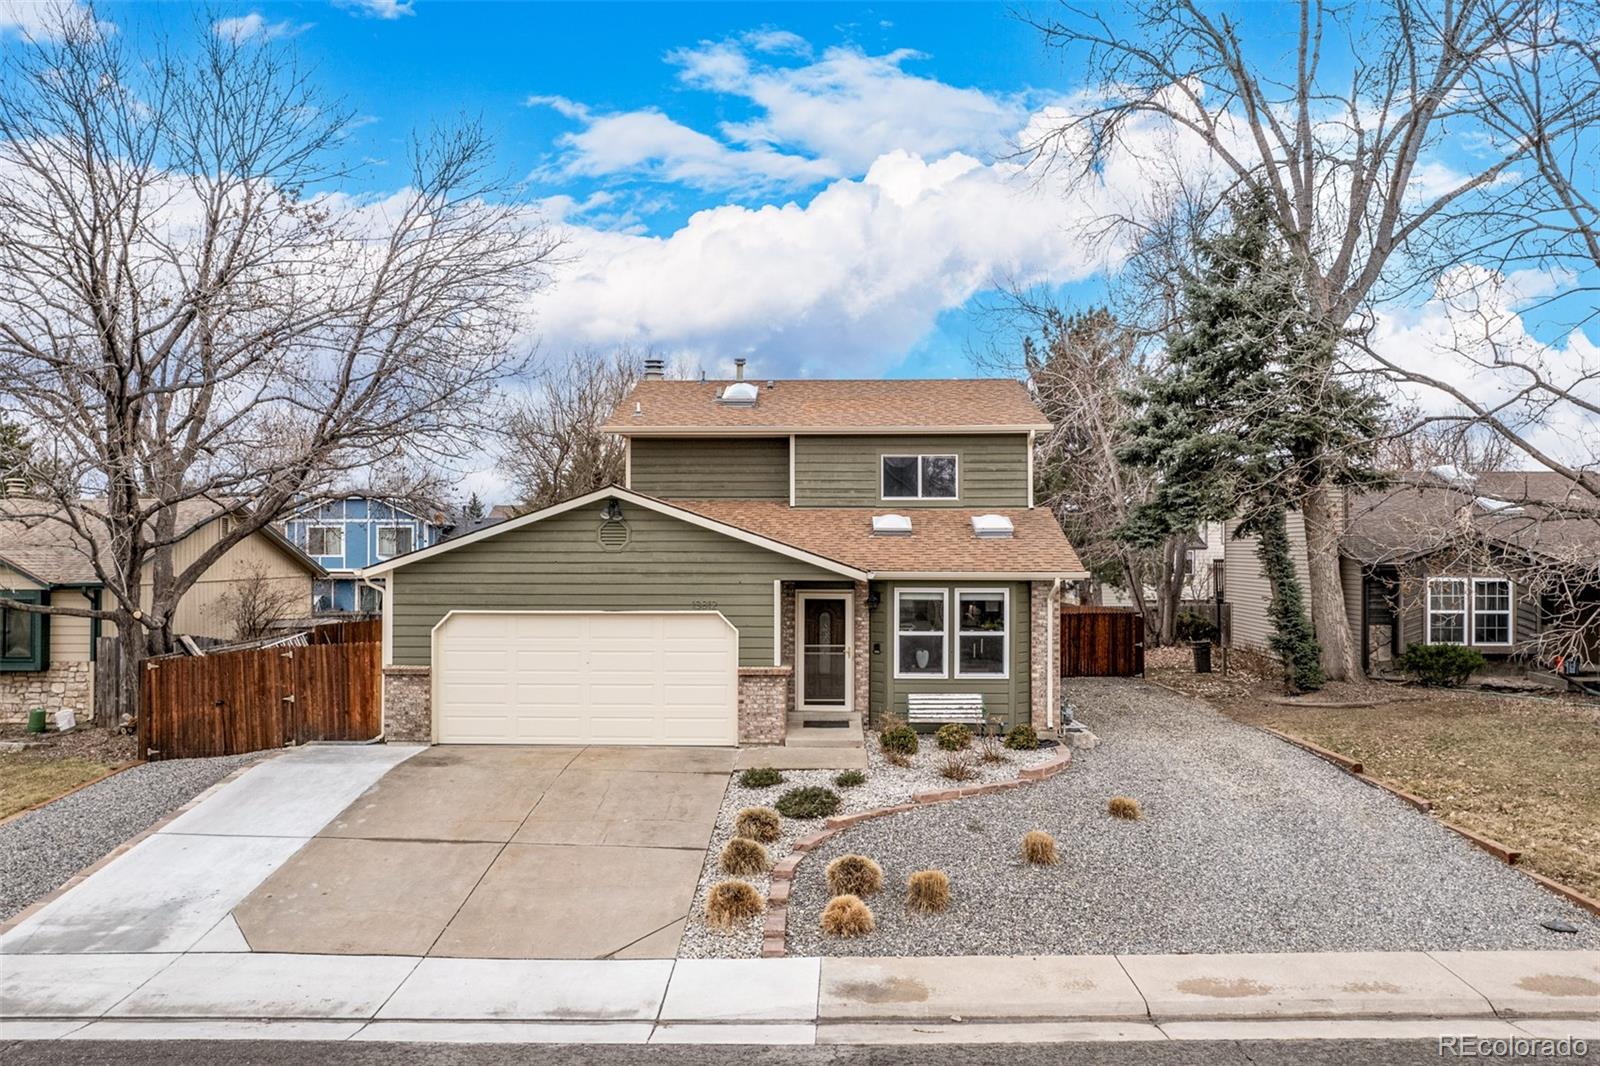 13812 W 66th Drive, arvada MLS: 8117044 Beds: 3 Baths: 4 Price: $725,000